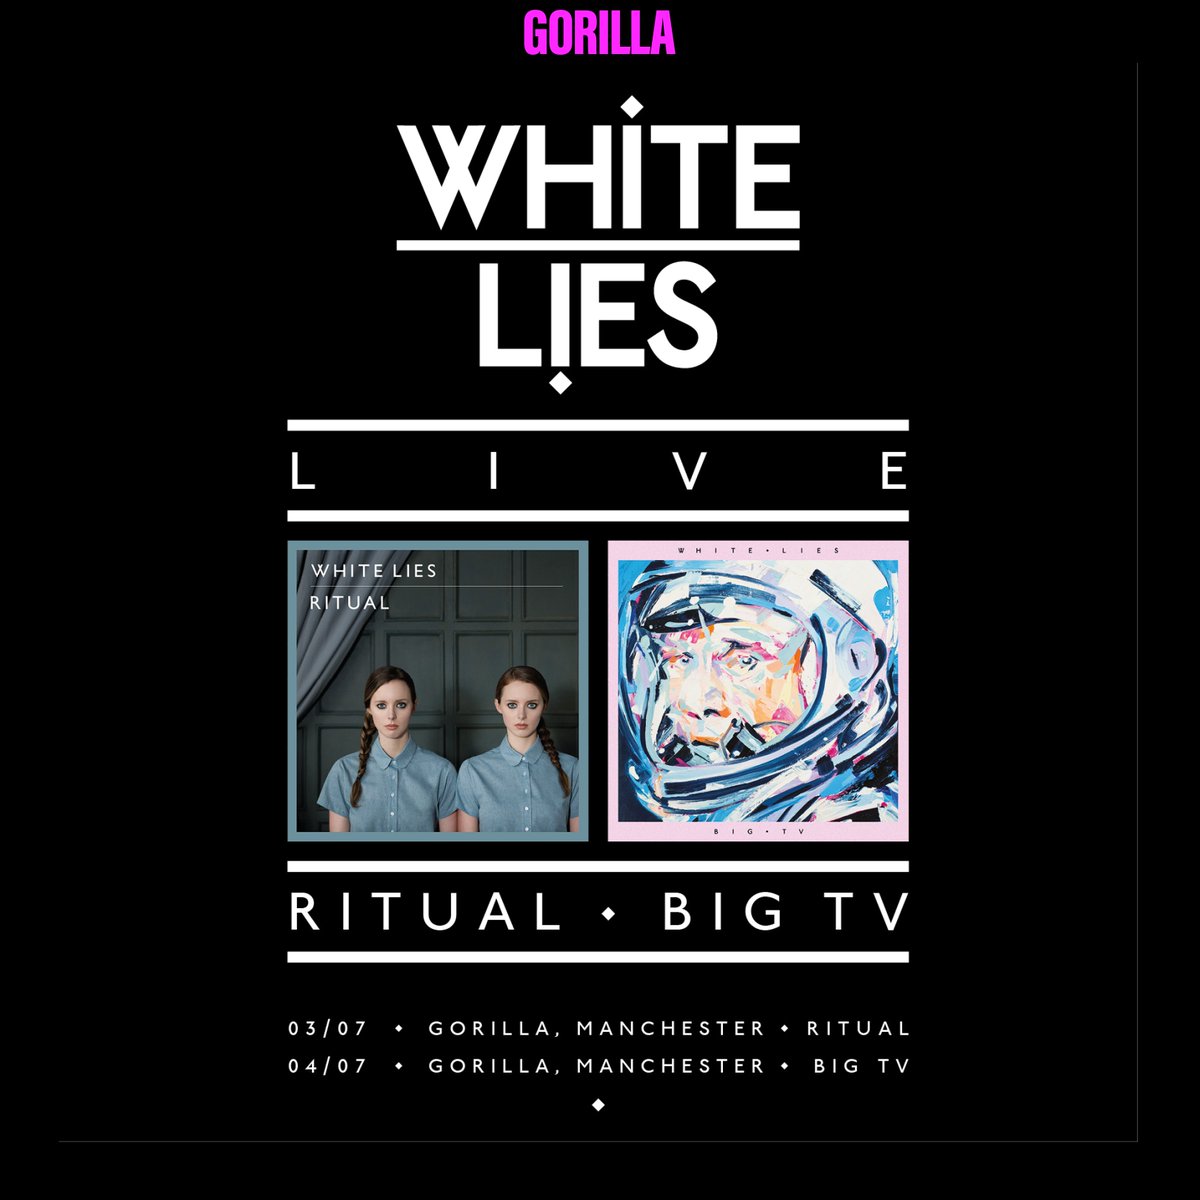 .@whiteliesmusic are stopping at Gorilla on the 3rd and 4th July celebrating their much adored albums Ritual and BIG TV. The beloved band will be playing each album in their entirety for the 1st time, accompanied by further from catalogue. Tix on sale Tuesday 23rd April at 9am